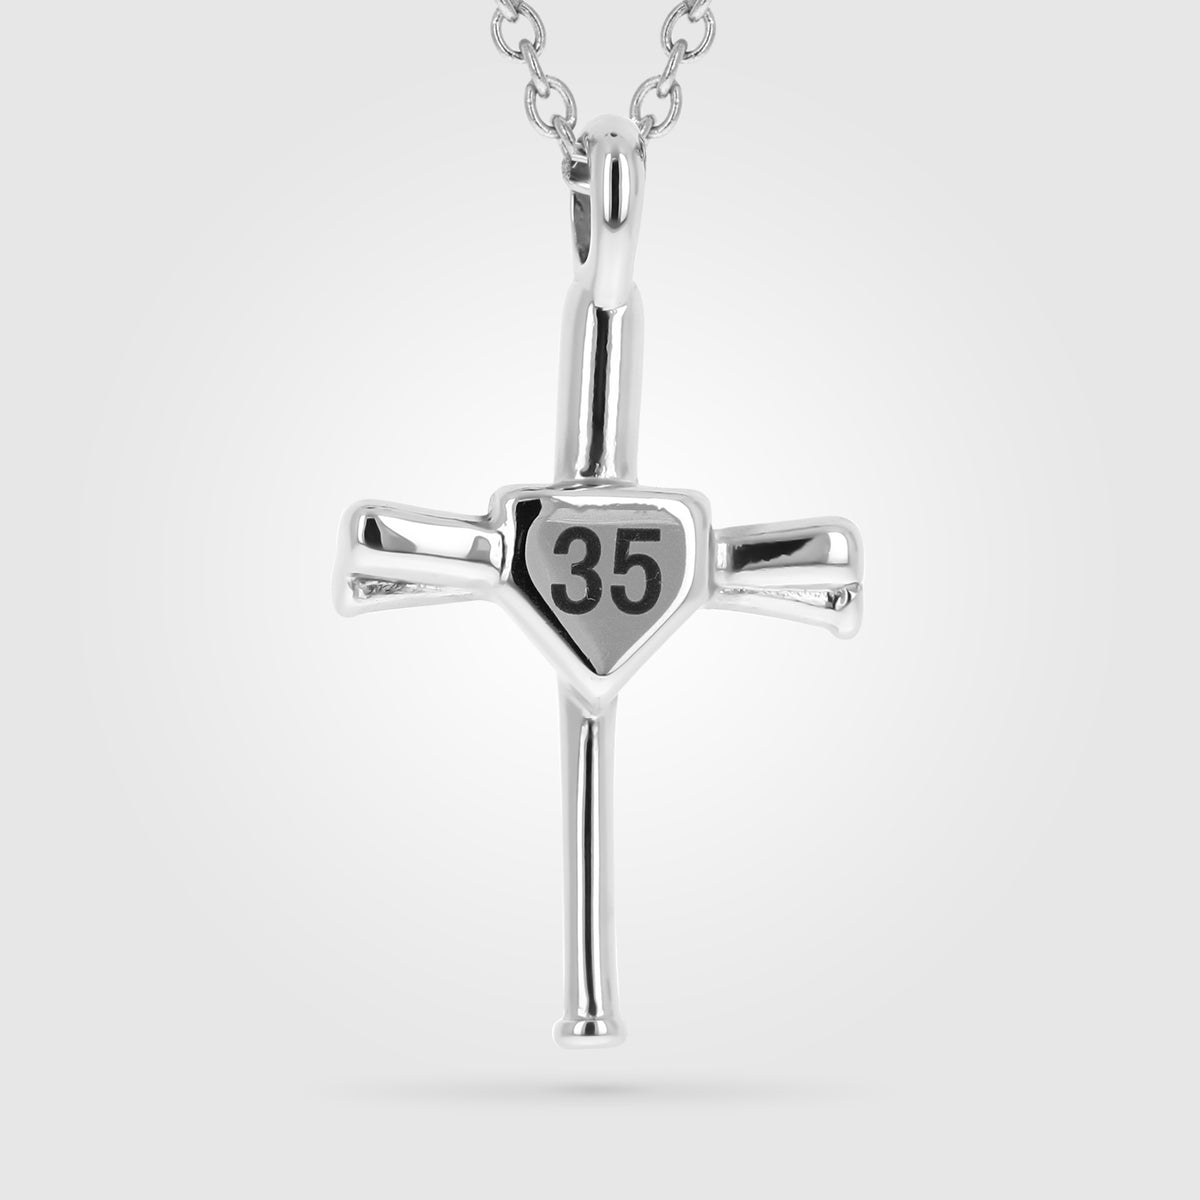 00-99 Baseball Bat Cross Necklaces for Boys with Number Stainless Steel  Athletes Pendant Silver Chain Teen Men's Softball Decor Equipment Youth  Girls Outdoor Sport Fans Jewelry Gift Customized | Wish